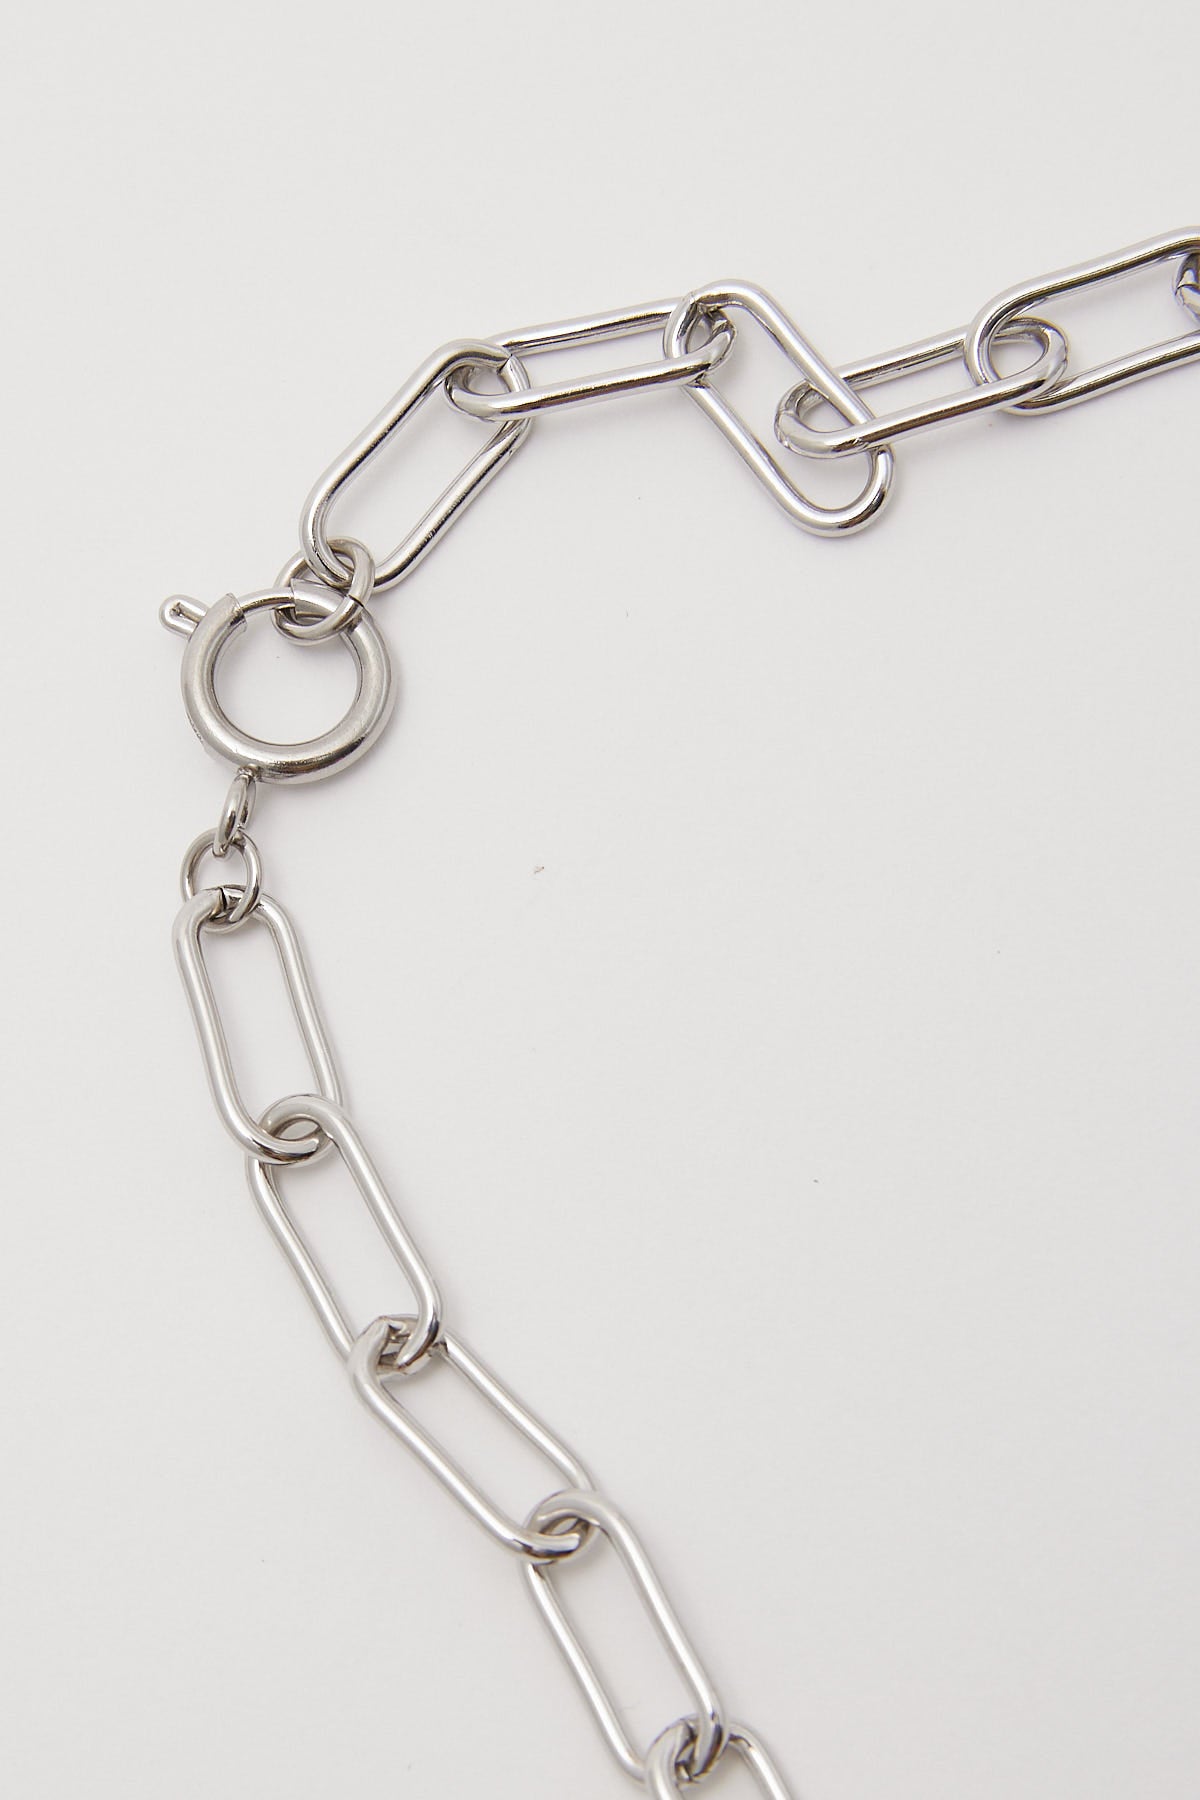 Neovision Linked Chain Necklace Stainless Steel